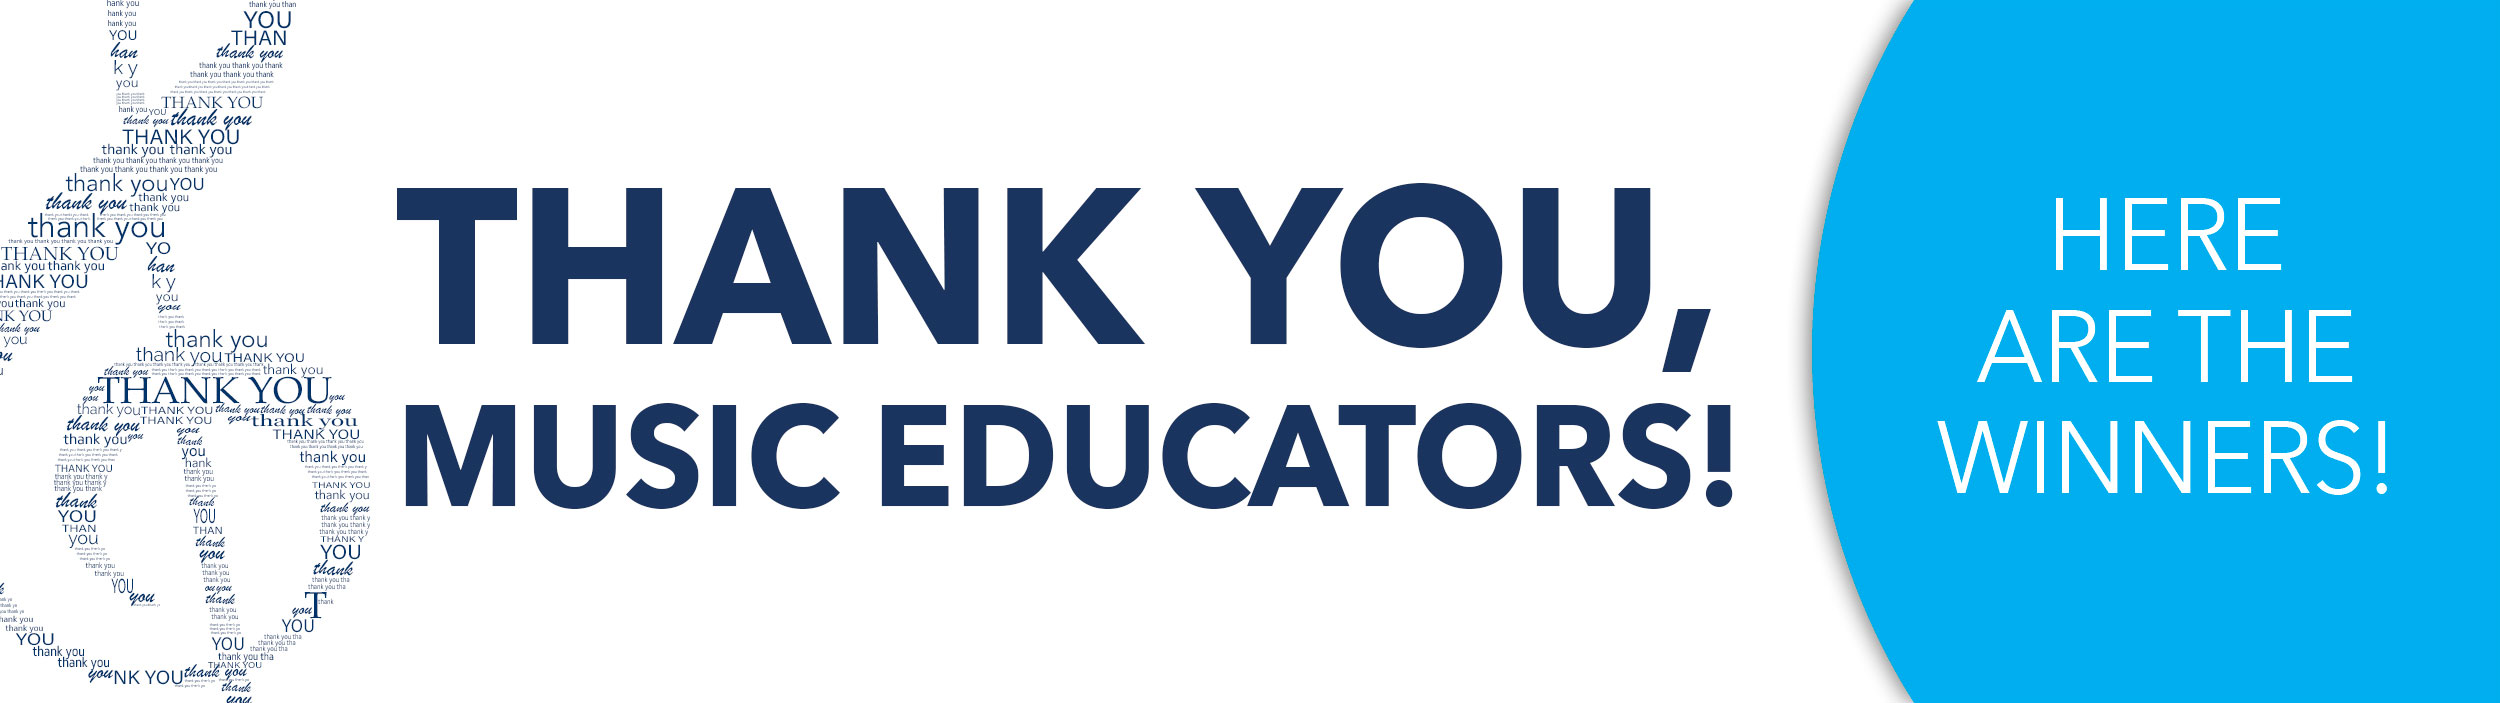 Thank you, Music Educators! Nominate an amazing teacher.  They could be recognized and rewarded.